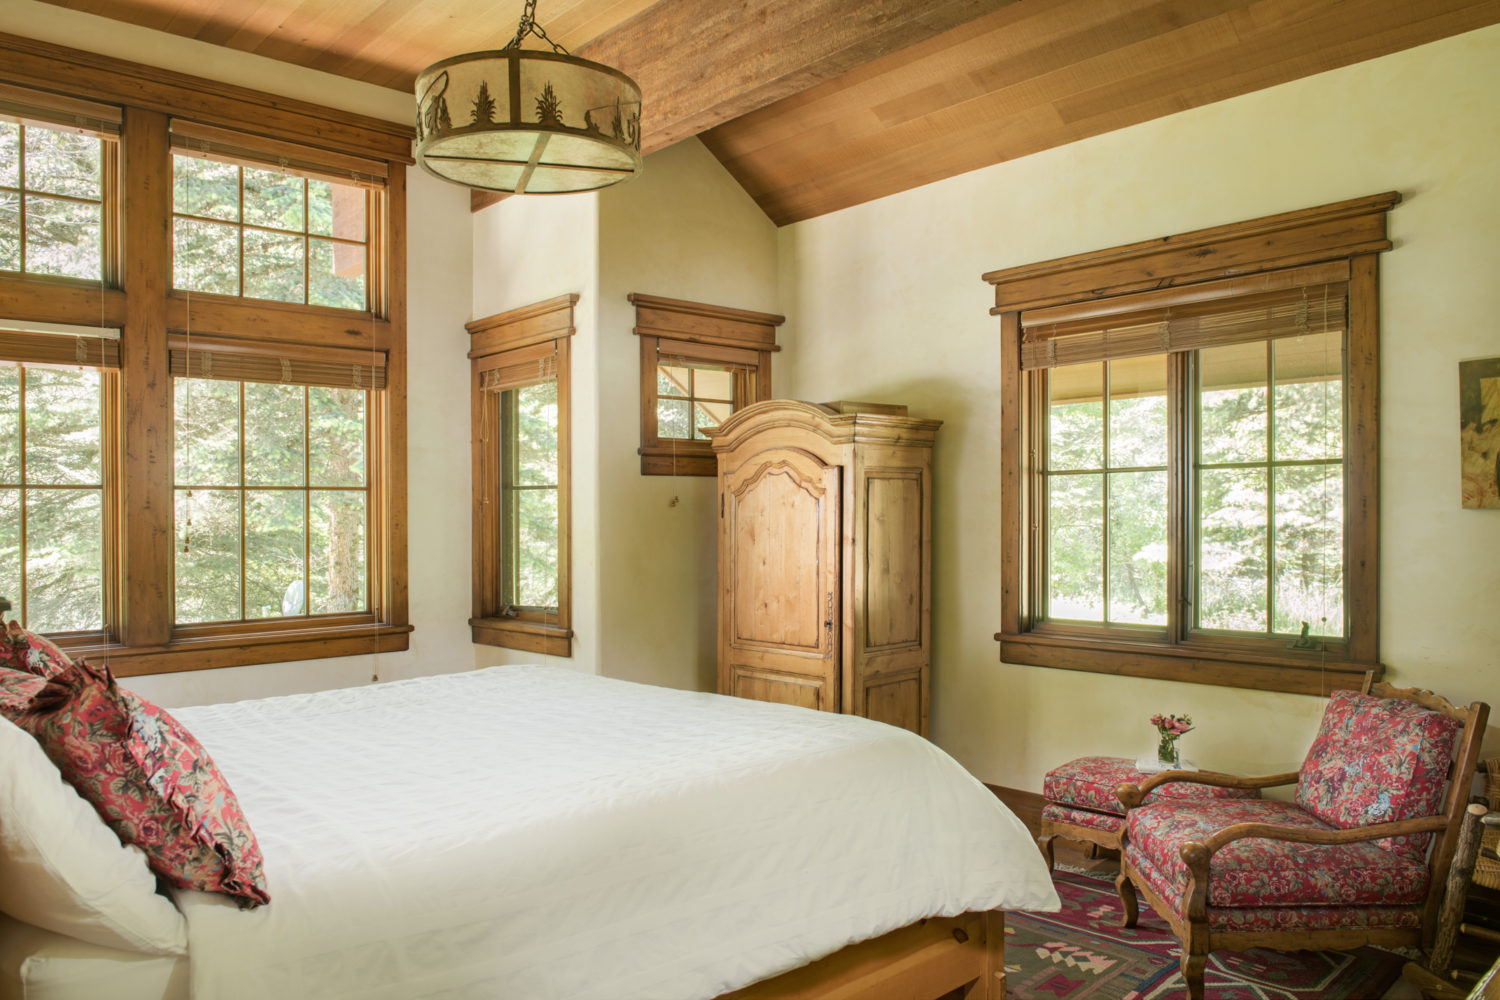 A bedroom with a king sized bed and windows with natural light